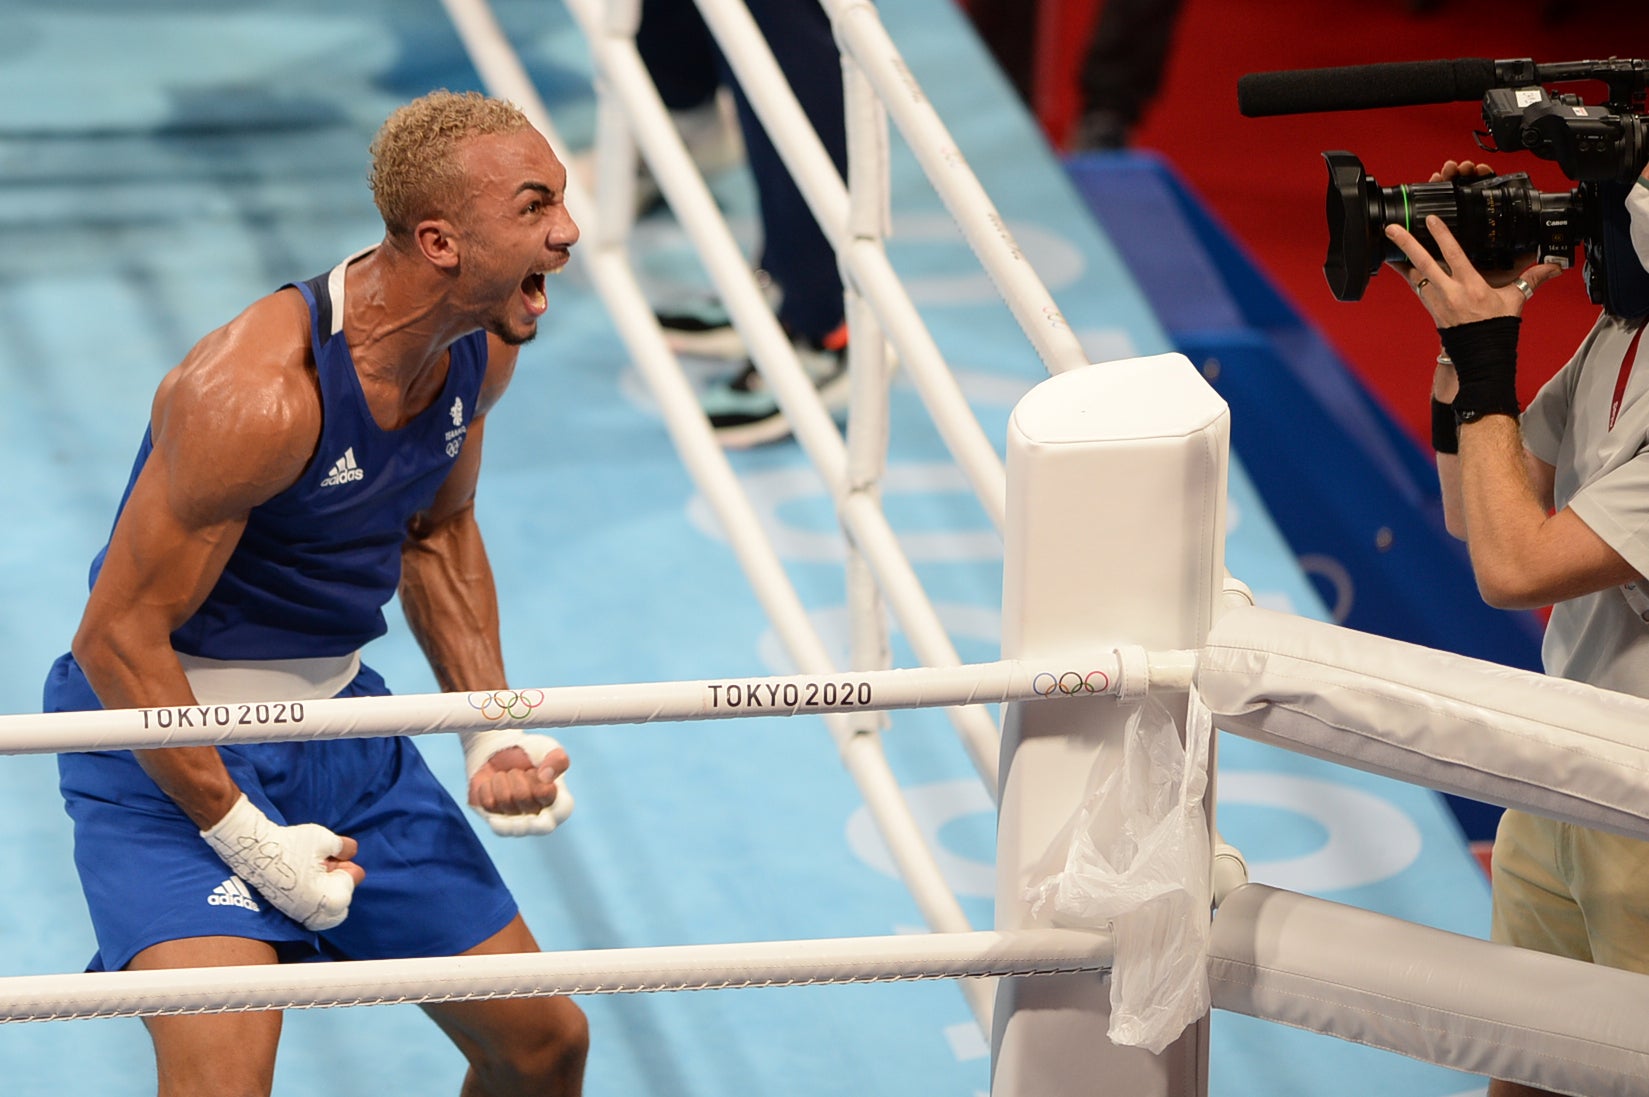 Great Britain’s Benjamin Whittaker celebrates after beating Brazil’s Keno Machado in the Men’s Light Heavy (75-81kg) Quarterfinal 2 at the Kokugikan Arena on the seventh day of the Tokyo 2020 Olympic Games in Japan. Picture date: Friday July 30, 2021.